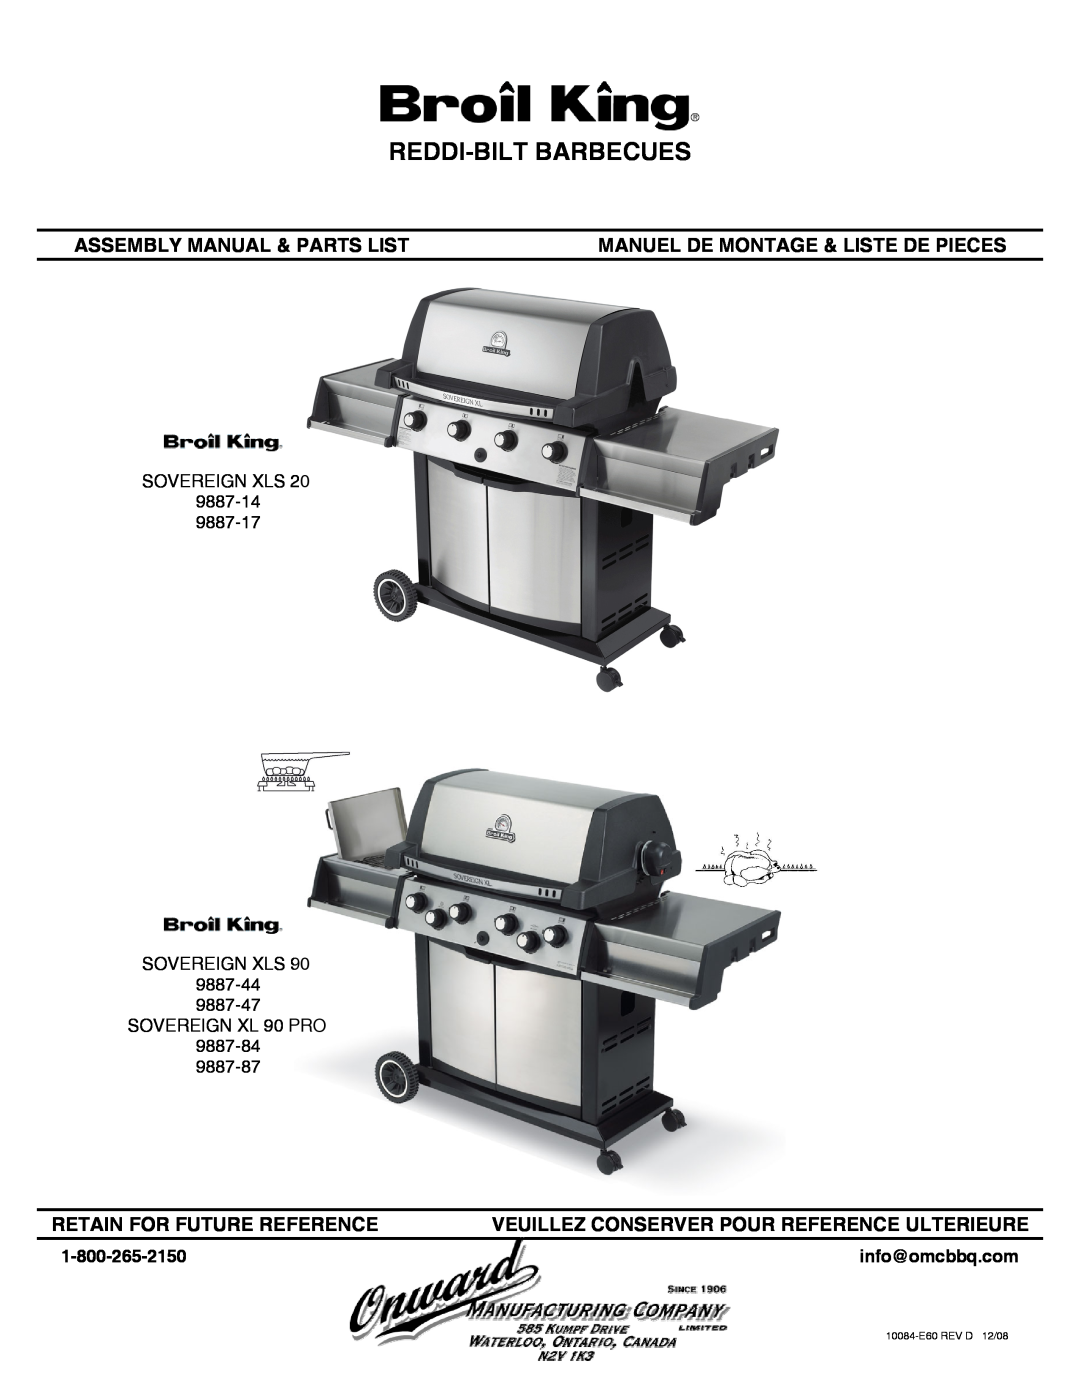 Broil King 9887-44 manual info@omcbbq.com, Reddi-Bilt Barbecues, Assembly Manual & Parts List, Retain For Future Reference 